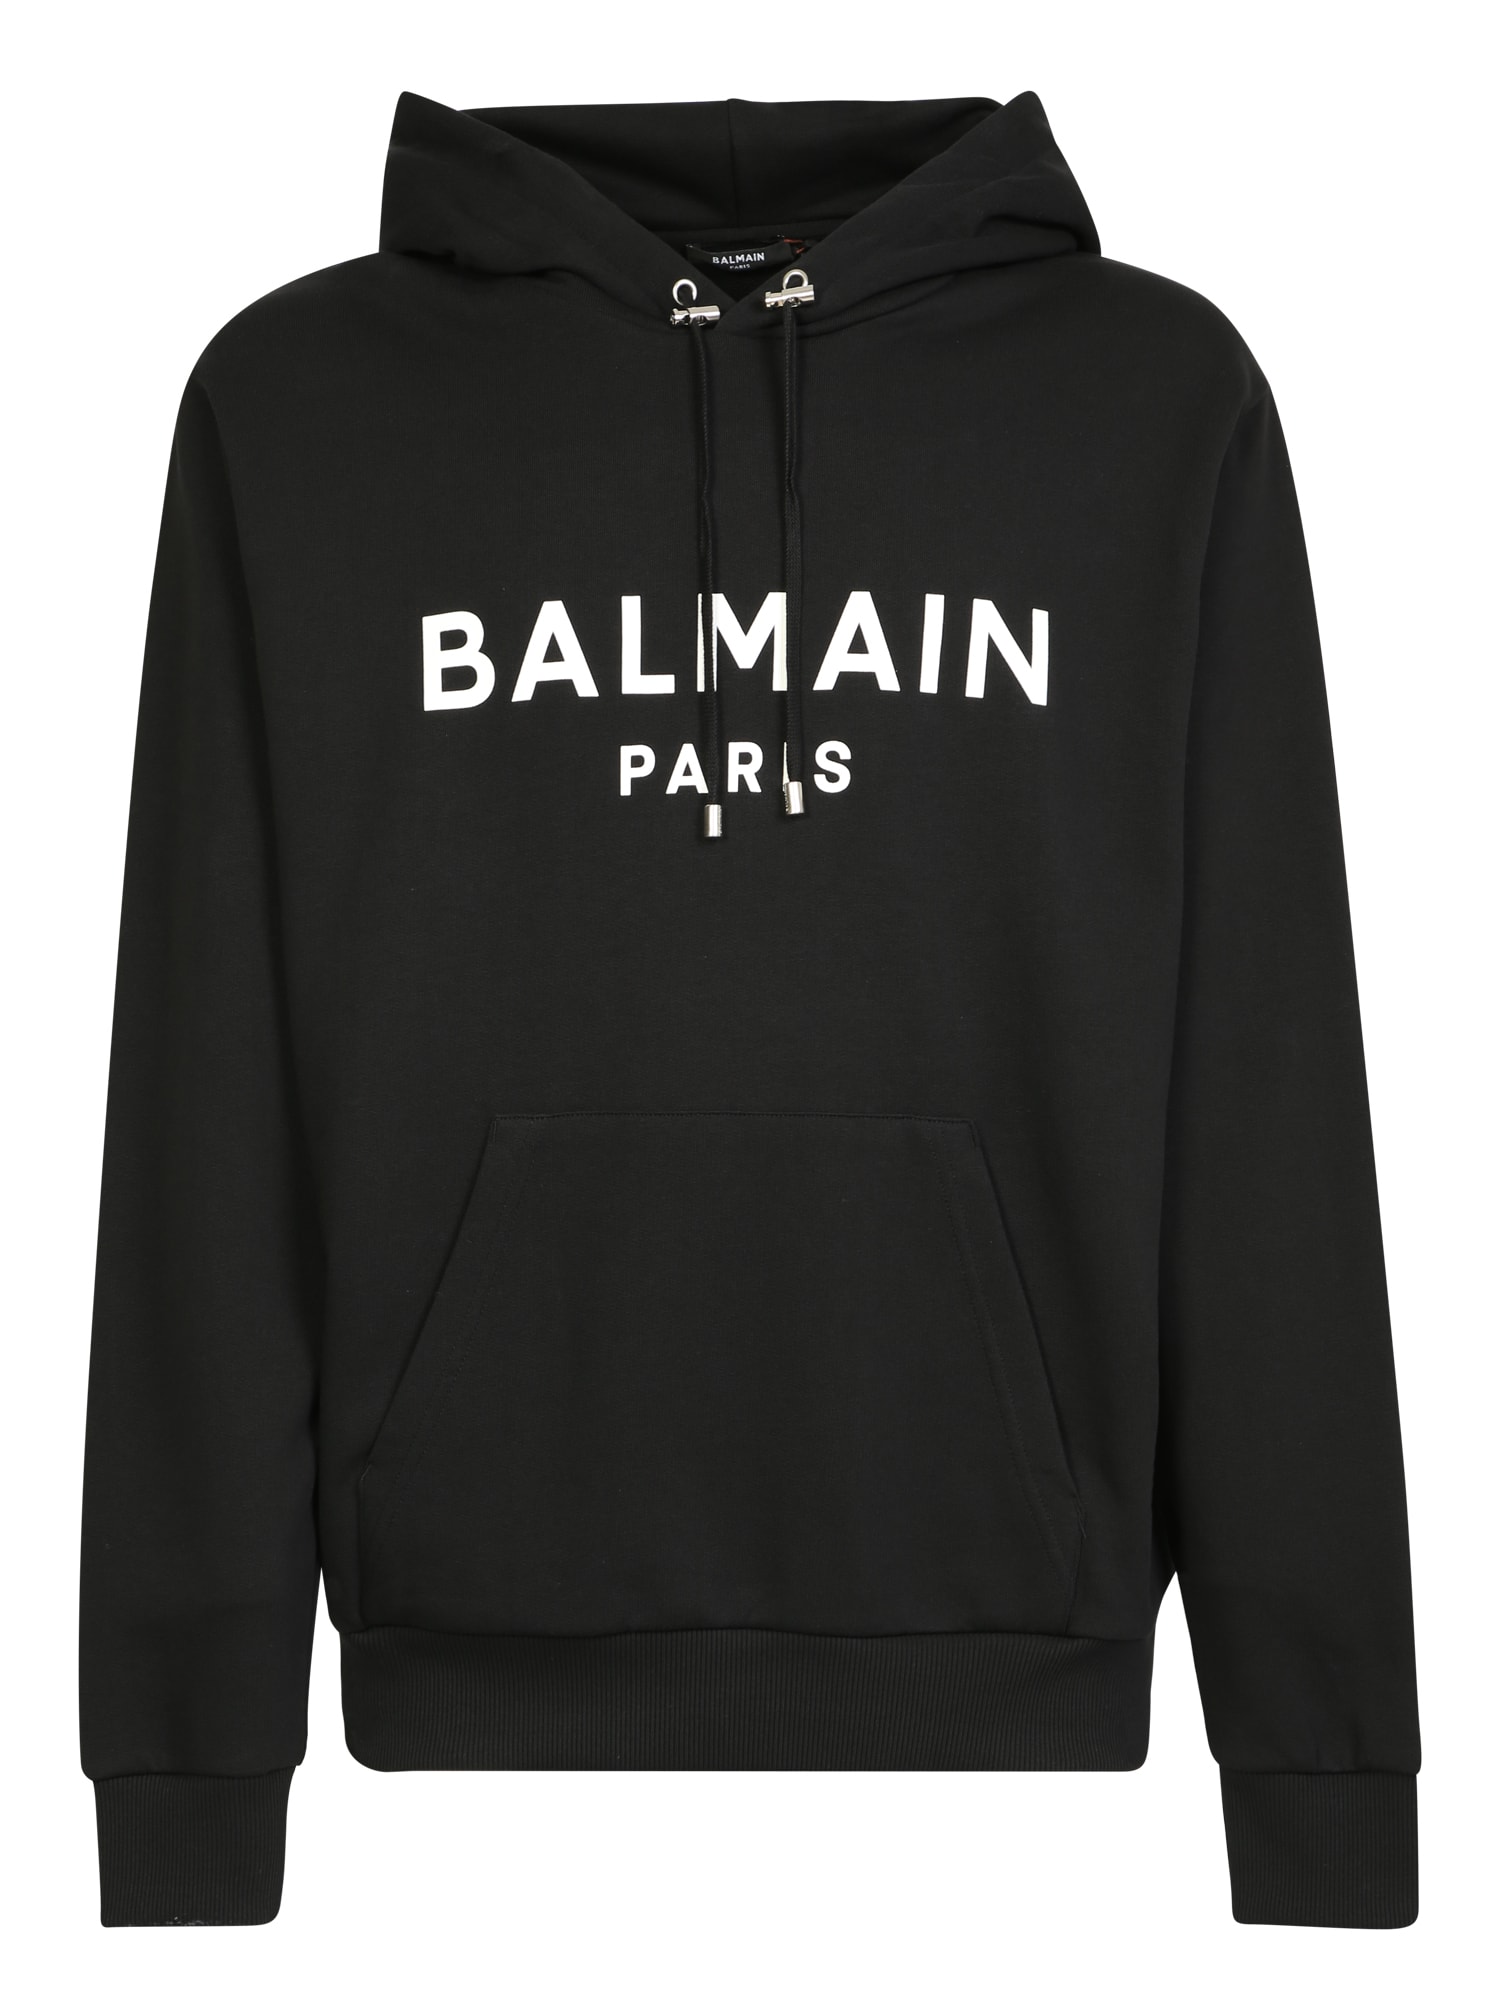 In The Trend Of Logomania, Balmain Can Only Be Missing With This Hooded Sweatshirt, Super Basic But Essential